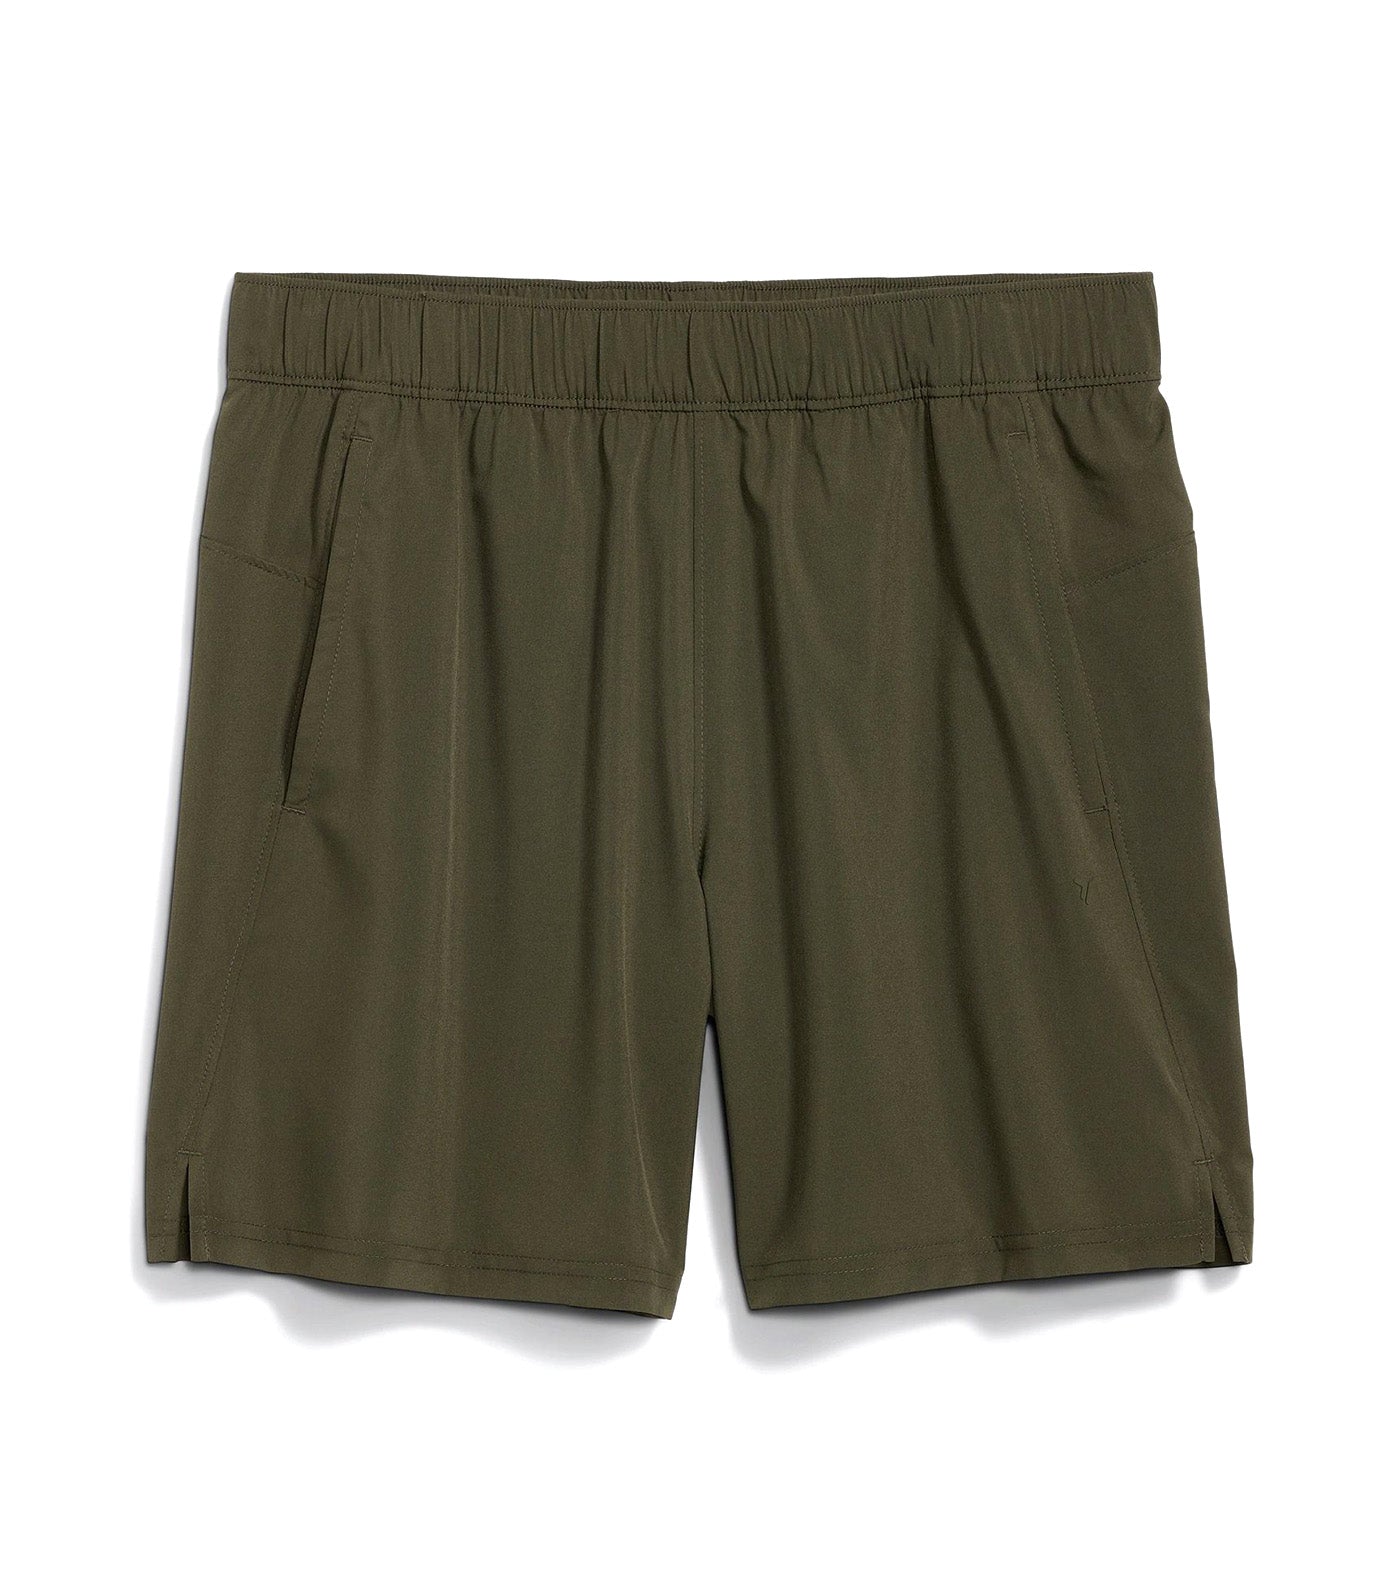 Essential Woven Workout Shorts for Men - 7-inch inseam Heritage Green